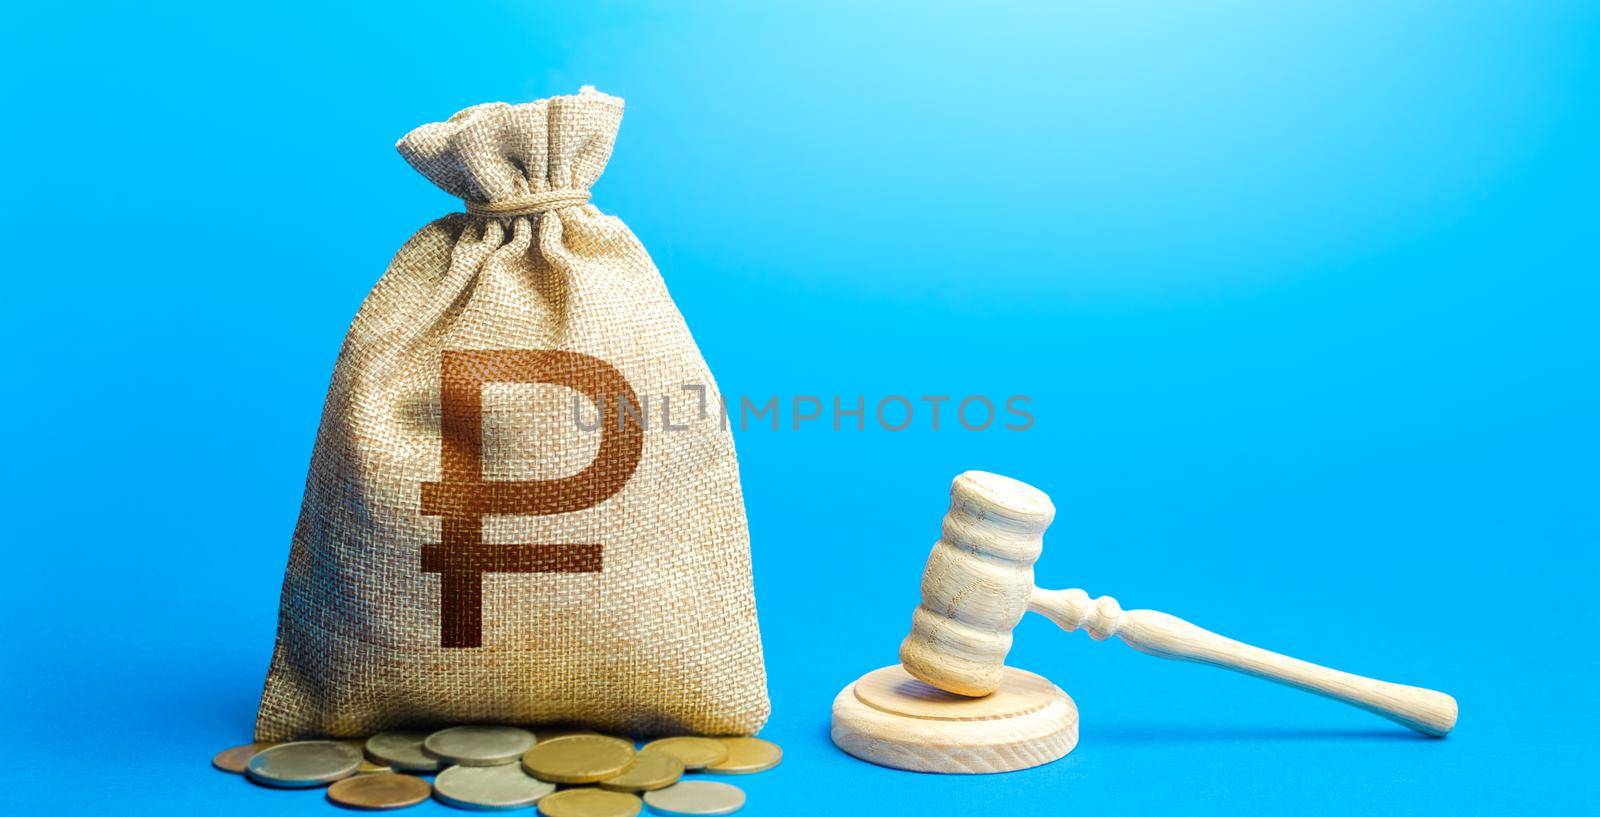 Russian ruble money bag and judge's gavel. Justice. Lawyer services. Awarding moral financial compensation. Protection rights. Litigation, dispute resolution, conflict of interest settlement.